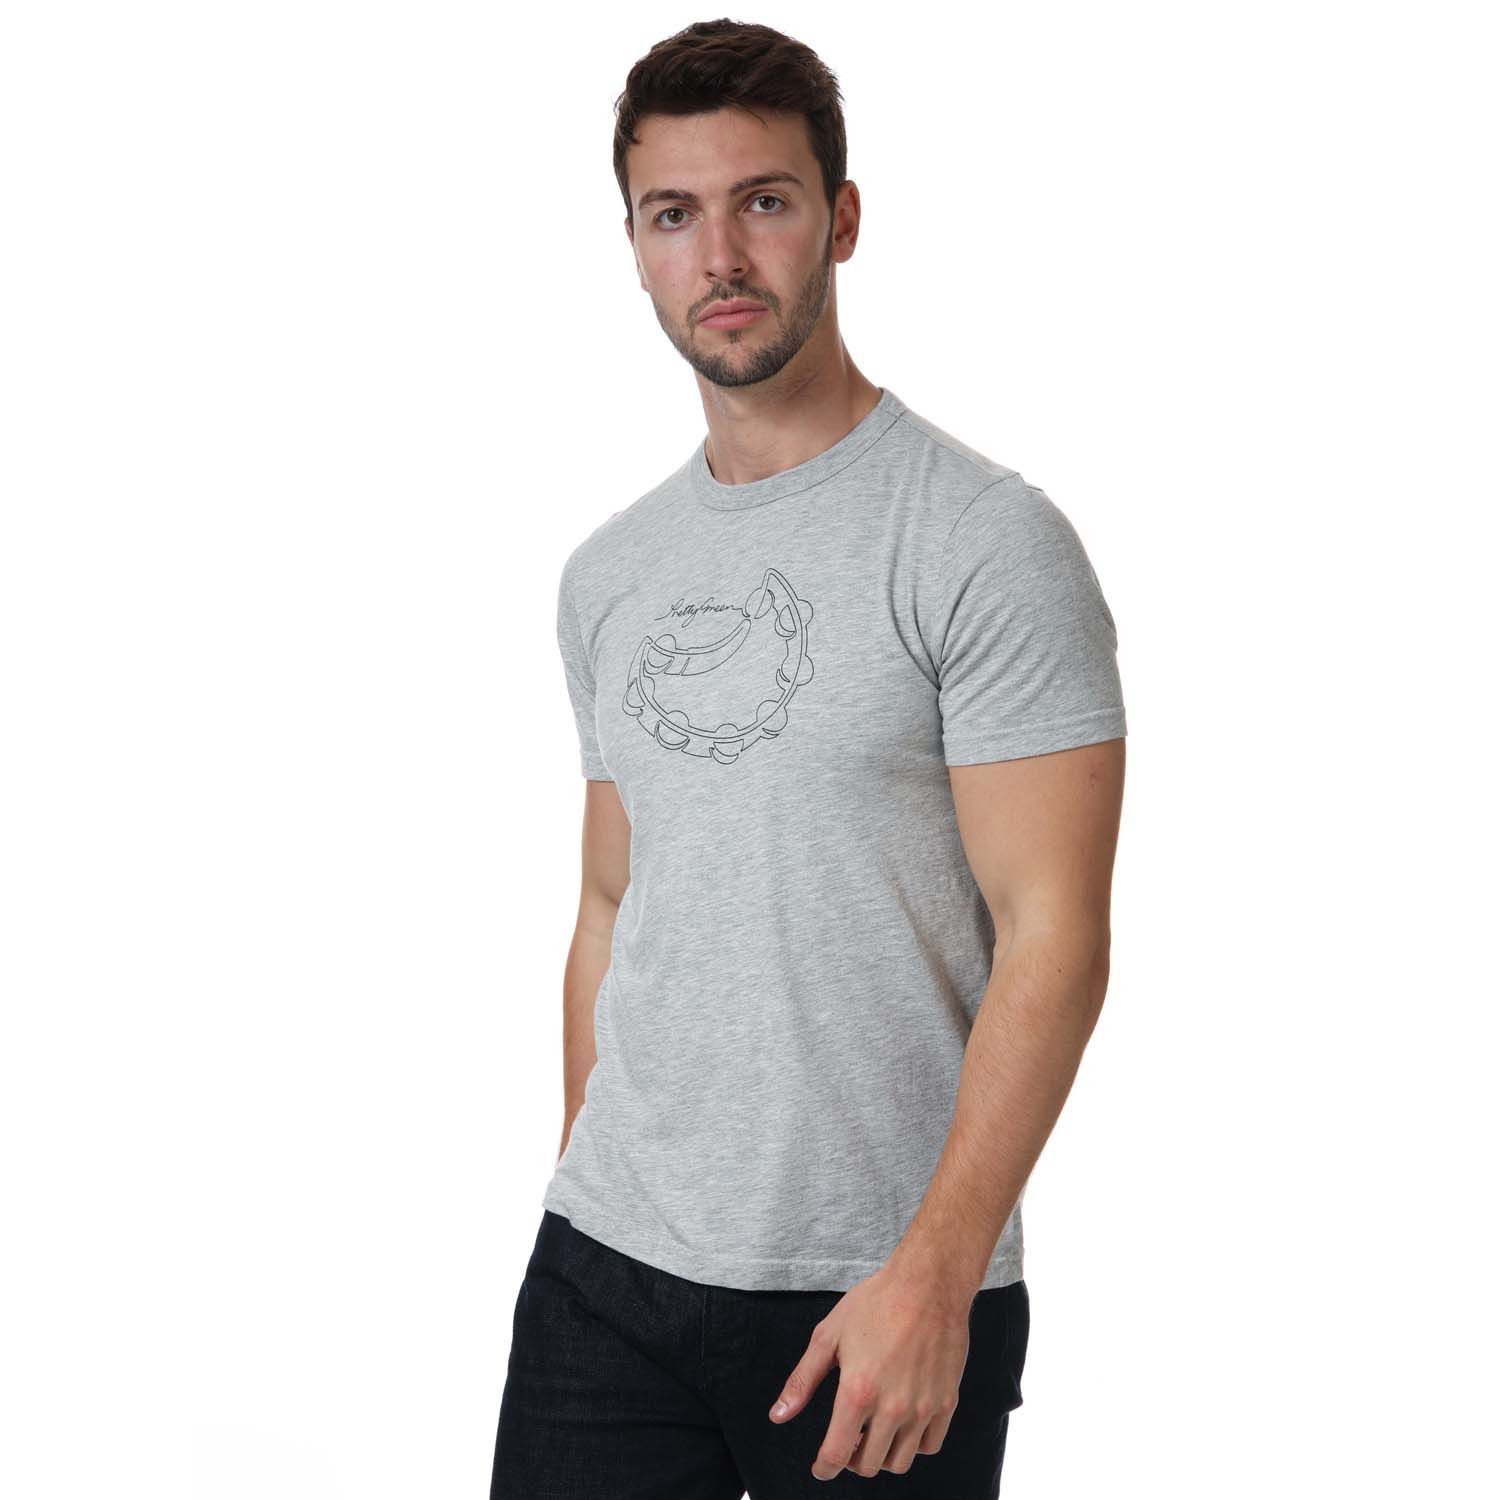 Mens Pretty Green Tambourine Print T- Shirt in grey marl.- Ribbed crew neckline.- Short sleeves.- Graphic designed.- Slim fit.- 50% Cotton  50% Polyester.  Machine wash at 30 degrees.- Ref: G21Q3MUJER979